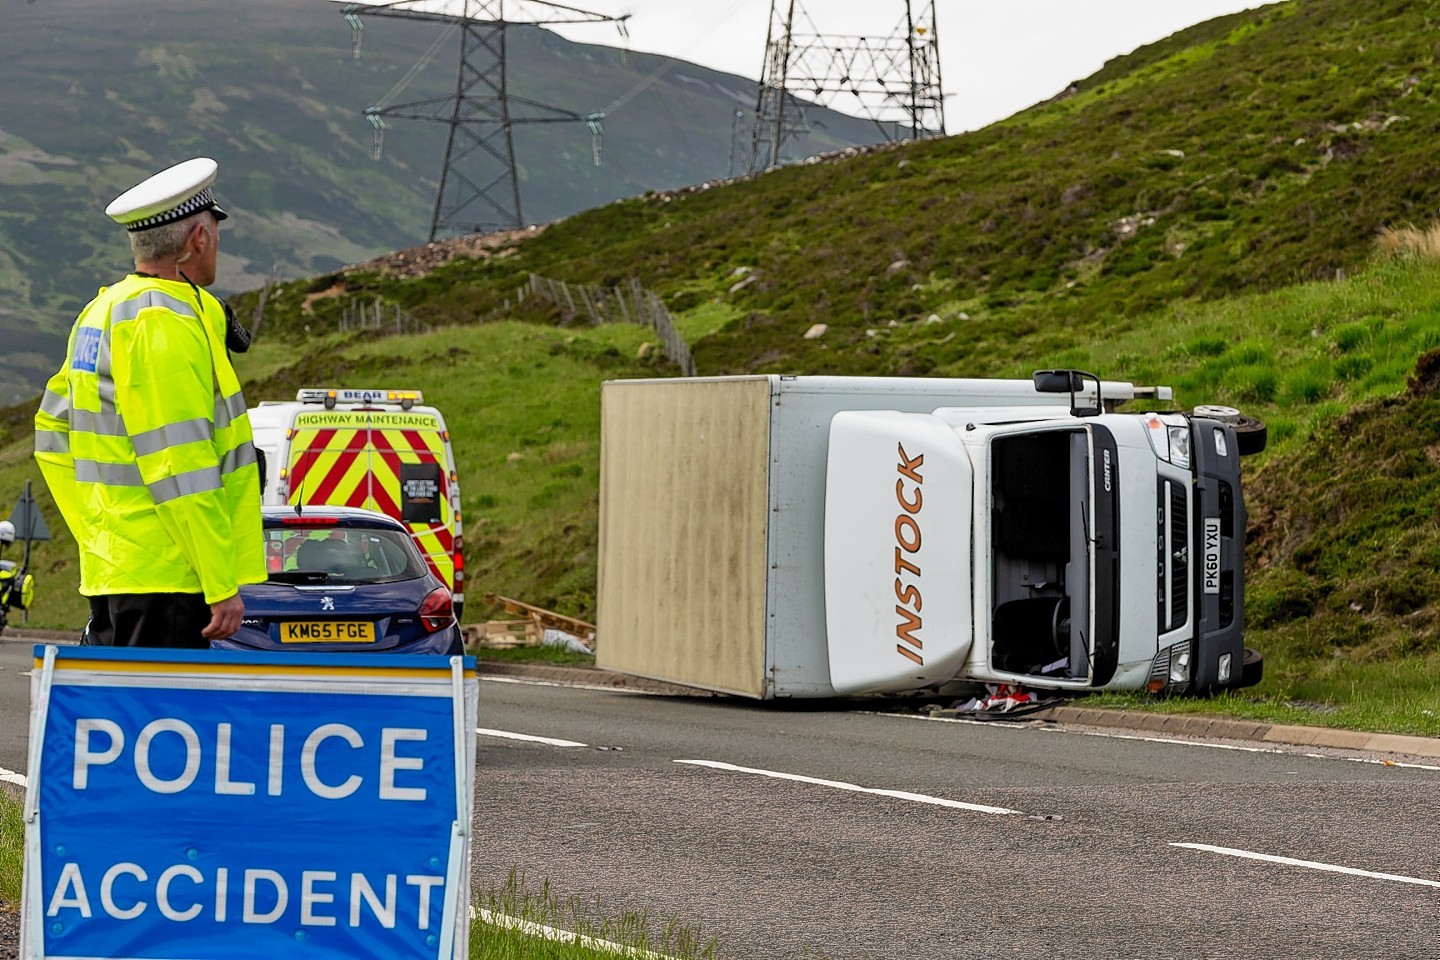 The lorry overturned on the A9